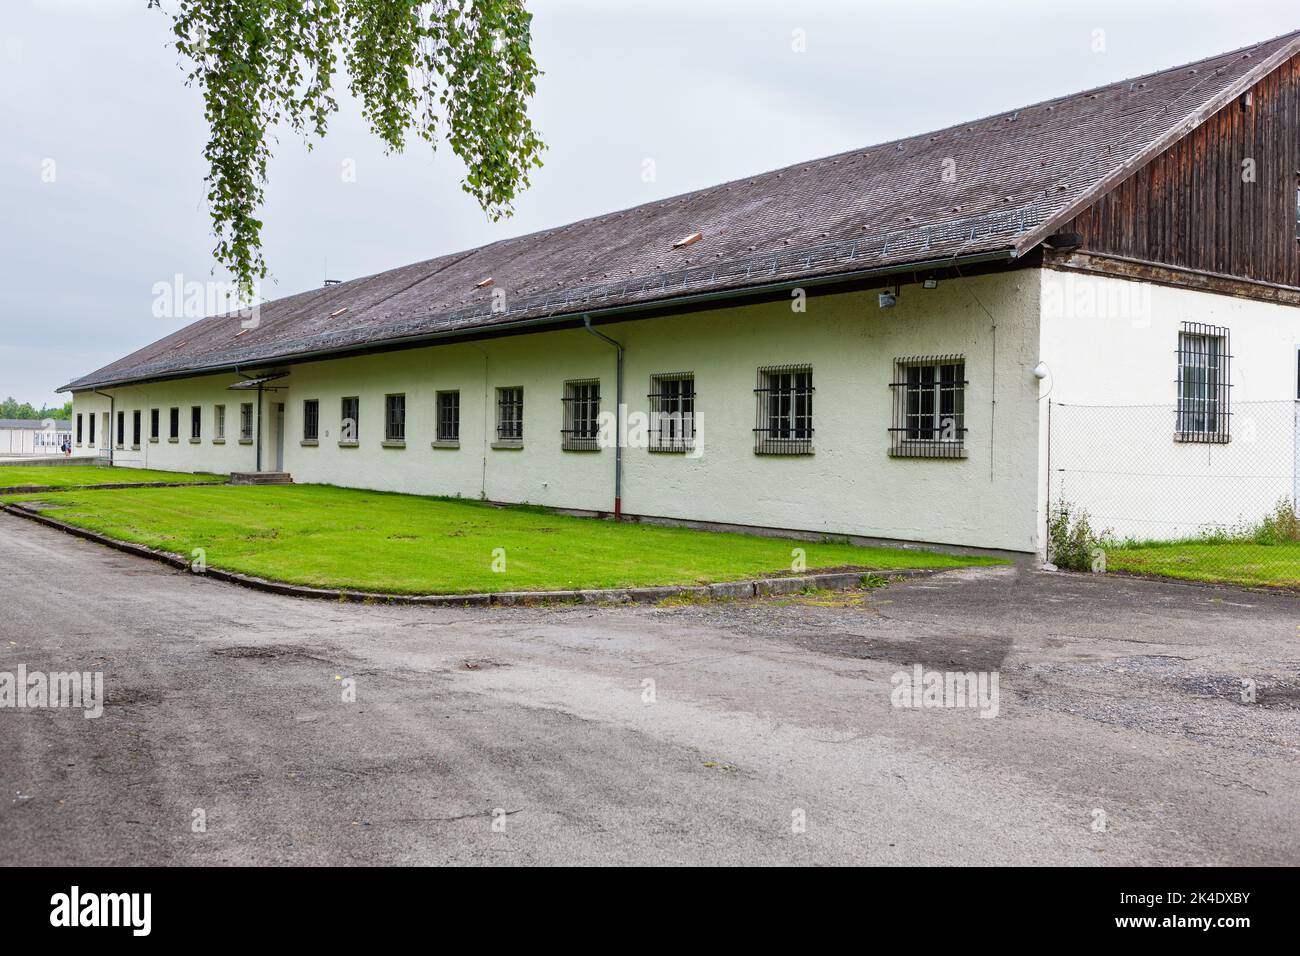 Dachau, Germany - July 4, 2011 : Dachau Concentration Camp Memorial Site. Nazi concentration camp from 1933 to 1945. Central administration building w Stock Photo